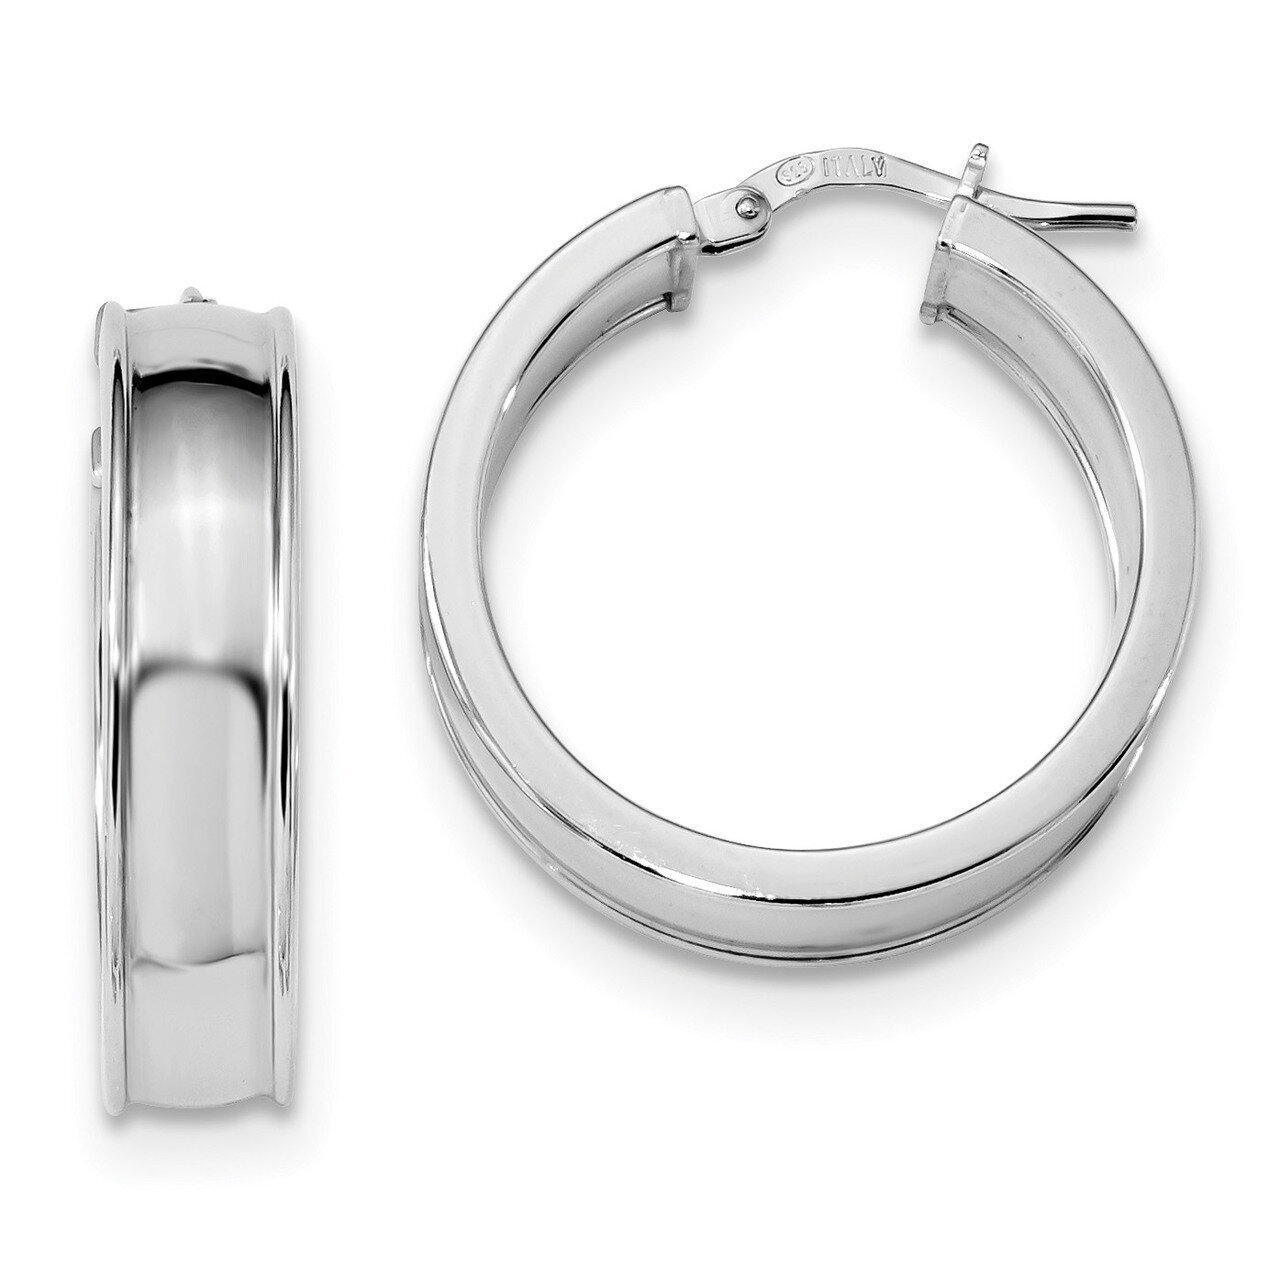 Beveled Edge Hoops Earrings Sterling Silver Rhodium-plated Polished QE13265